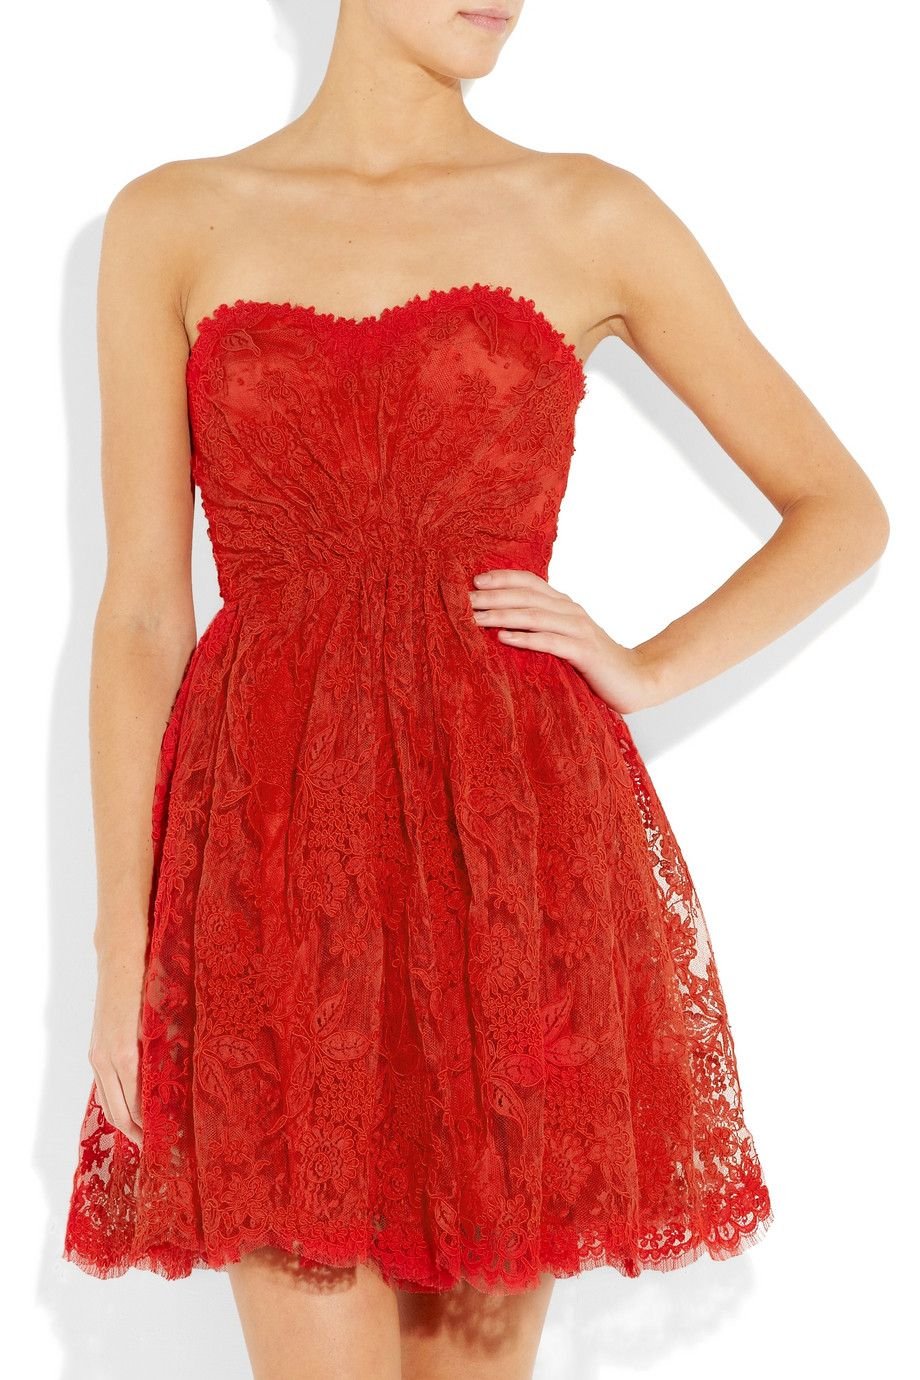 Issa Strapless Lace Dress in Red.jpg